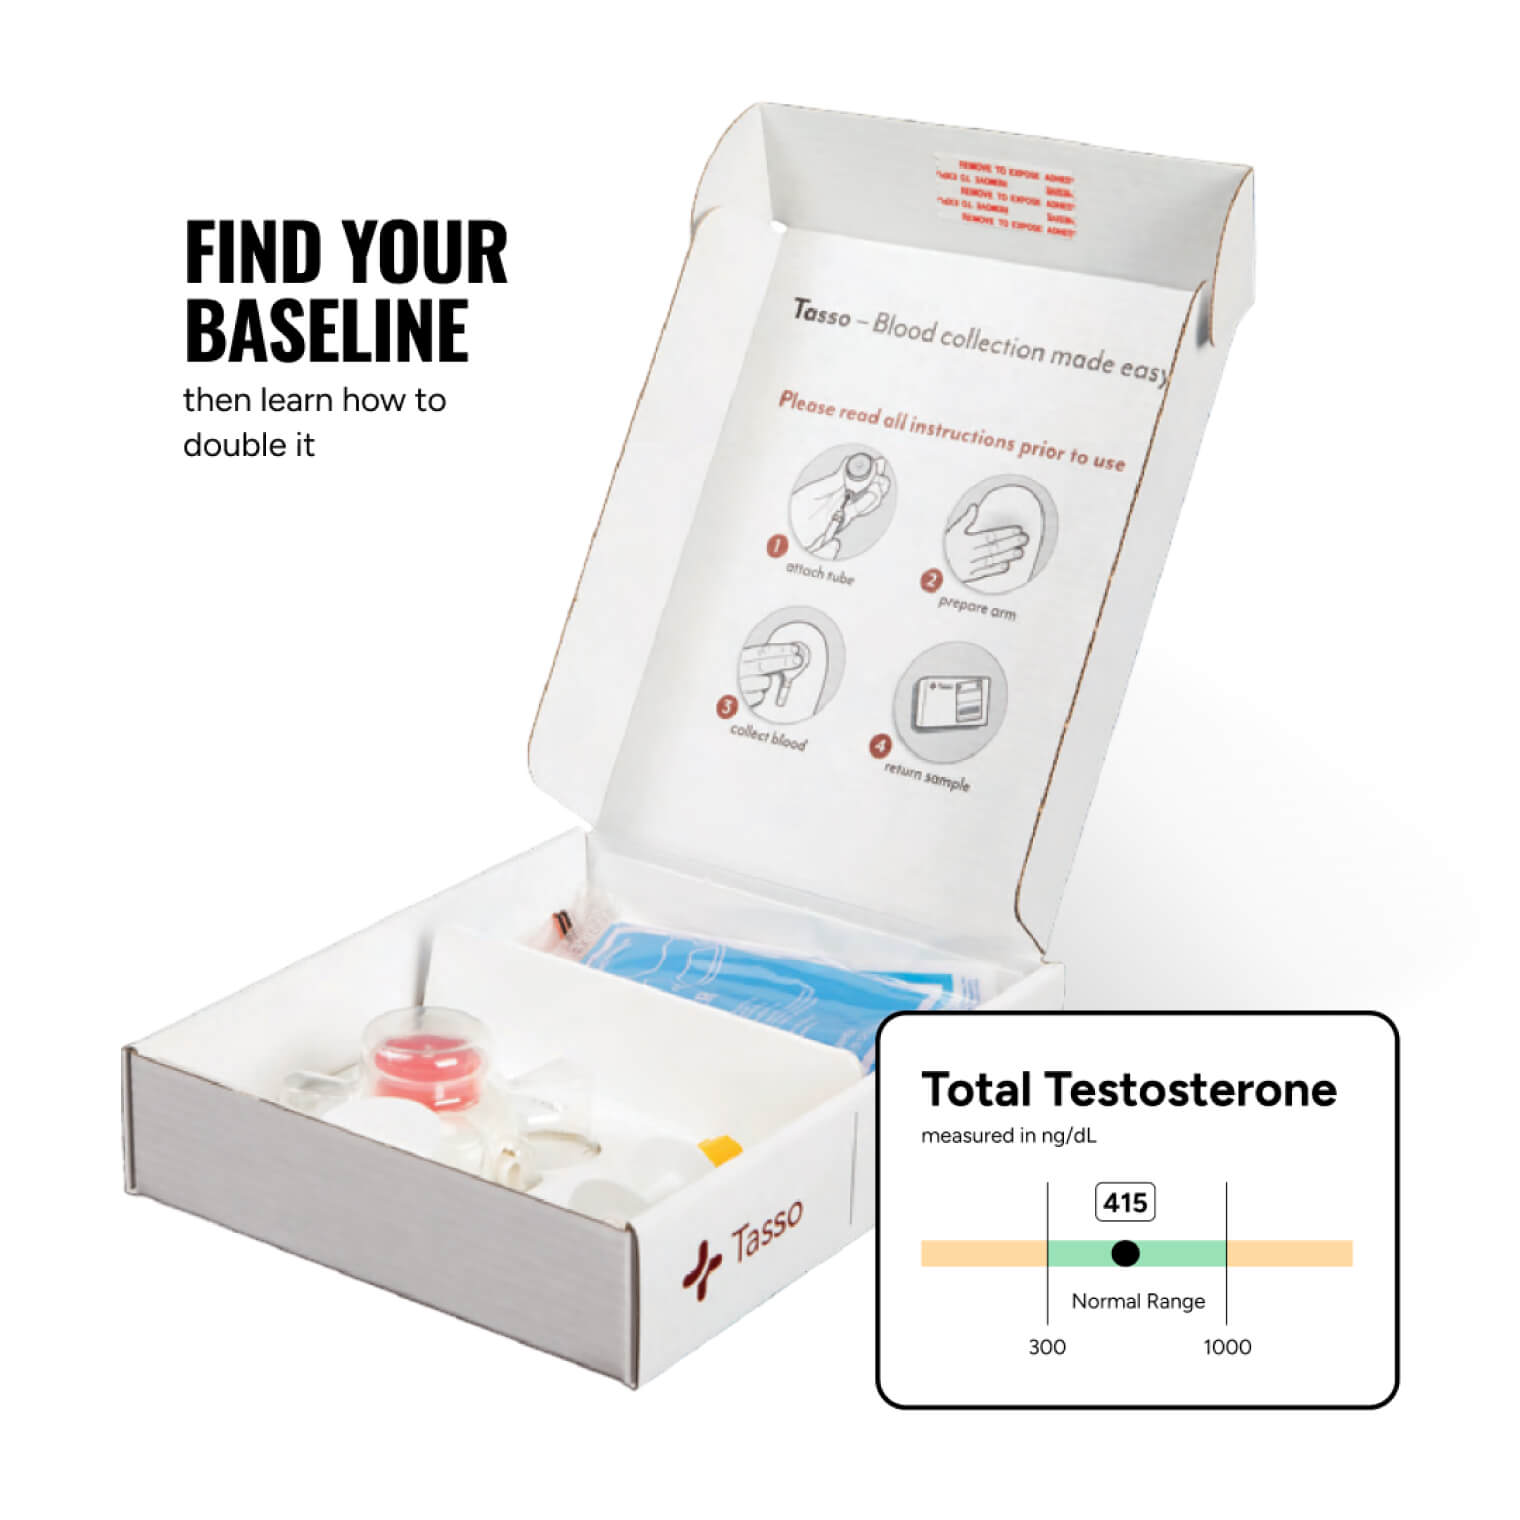 CashLabs Testosterone Test - At-Home Collection Kit Review: Accuracy and  Benefits of Testing Your Testosterone Level at Home